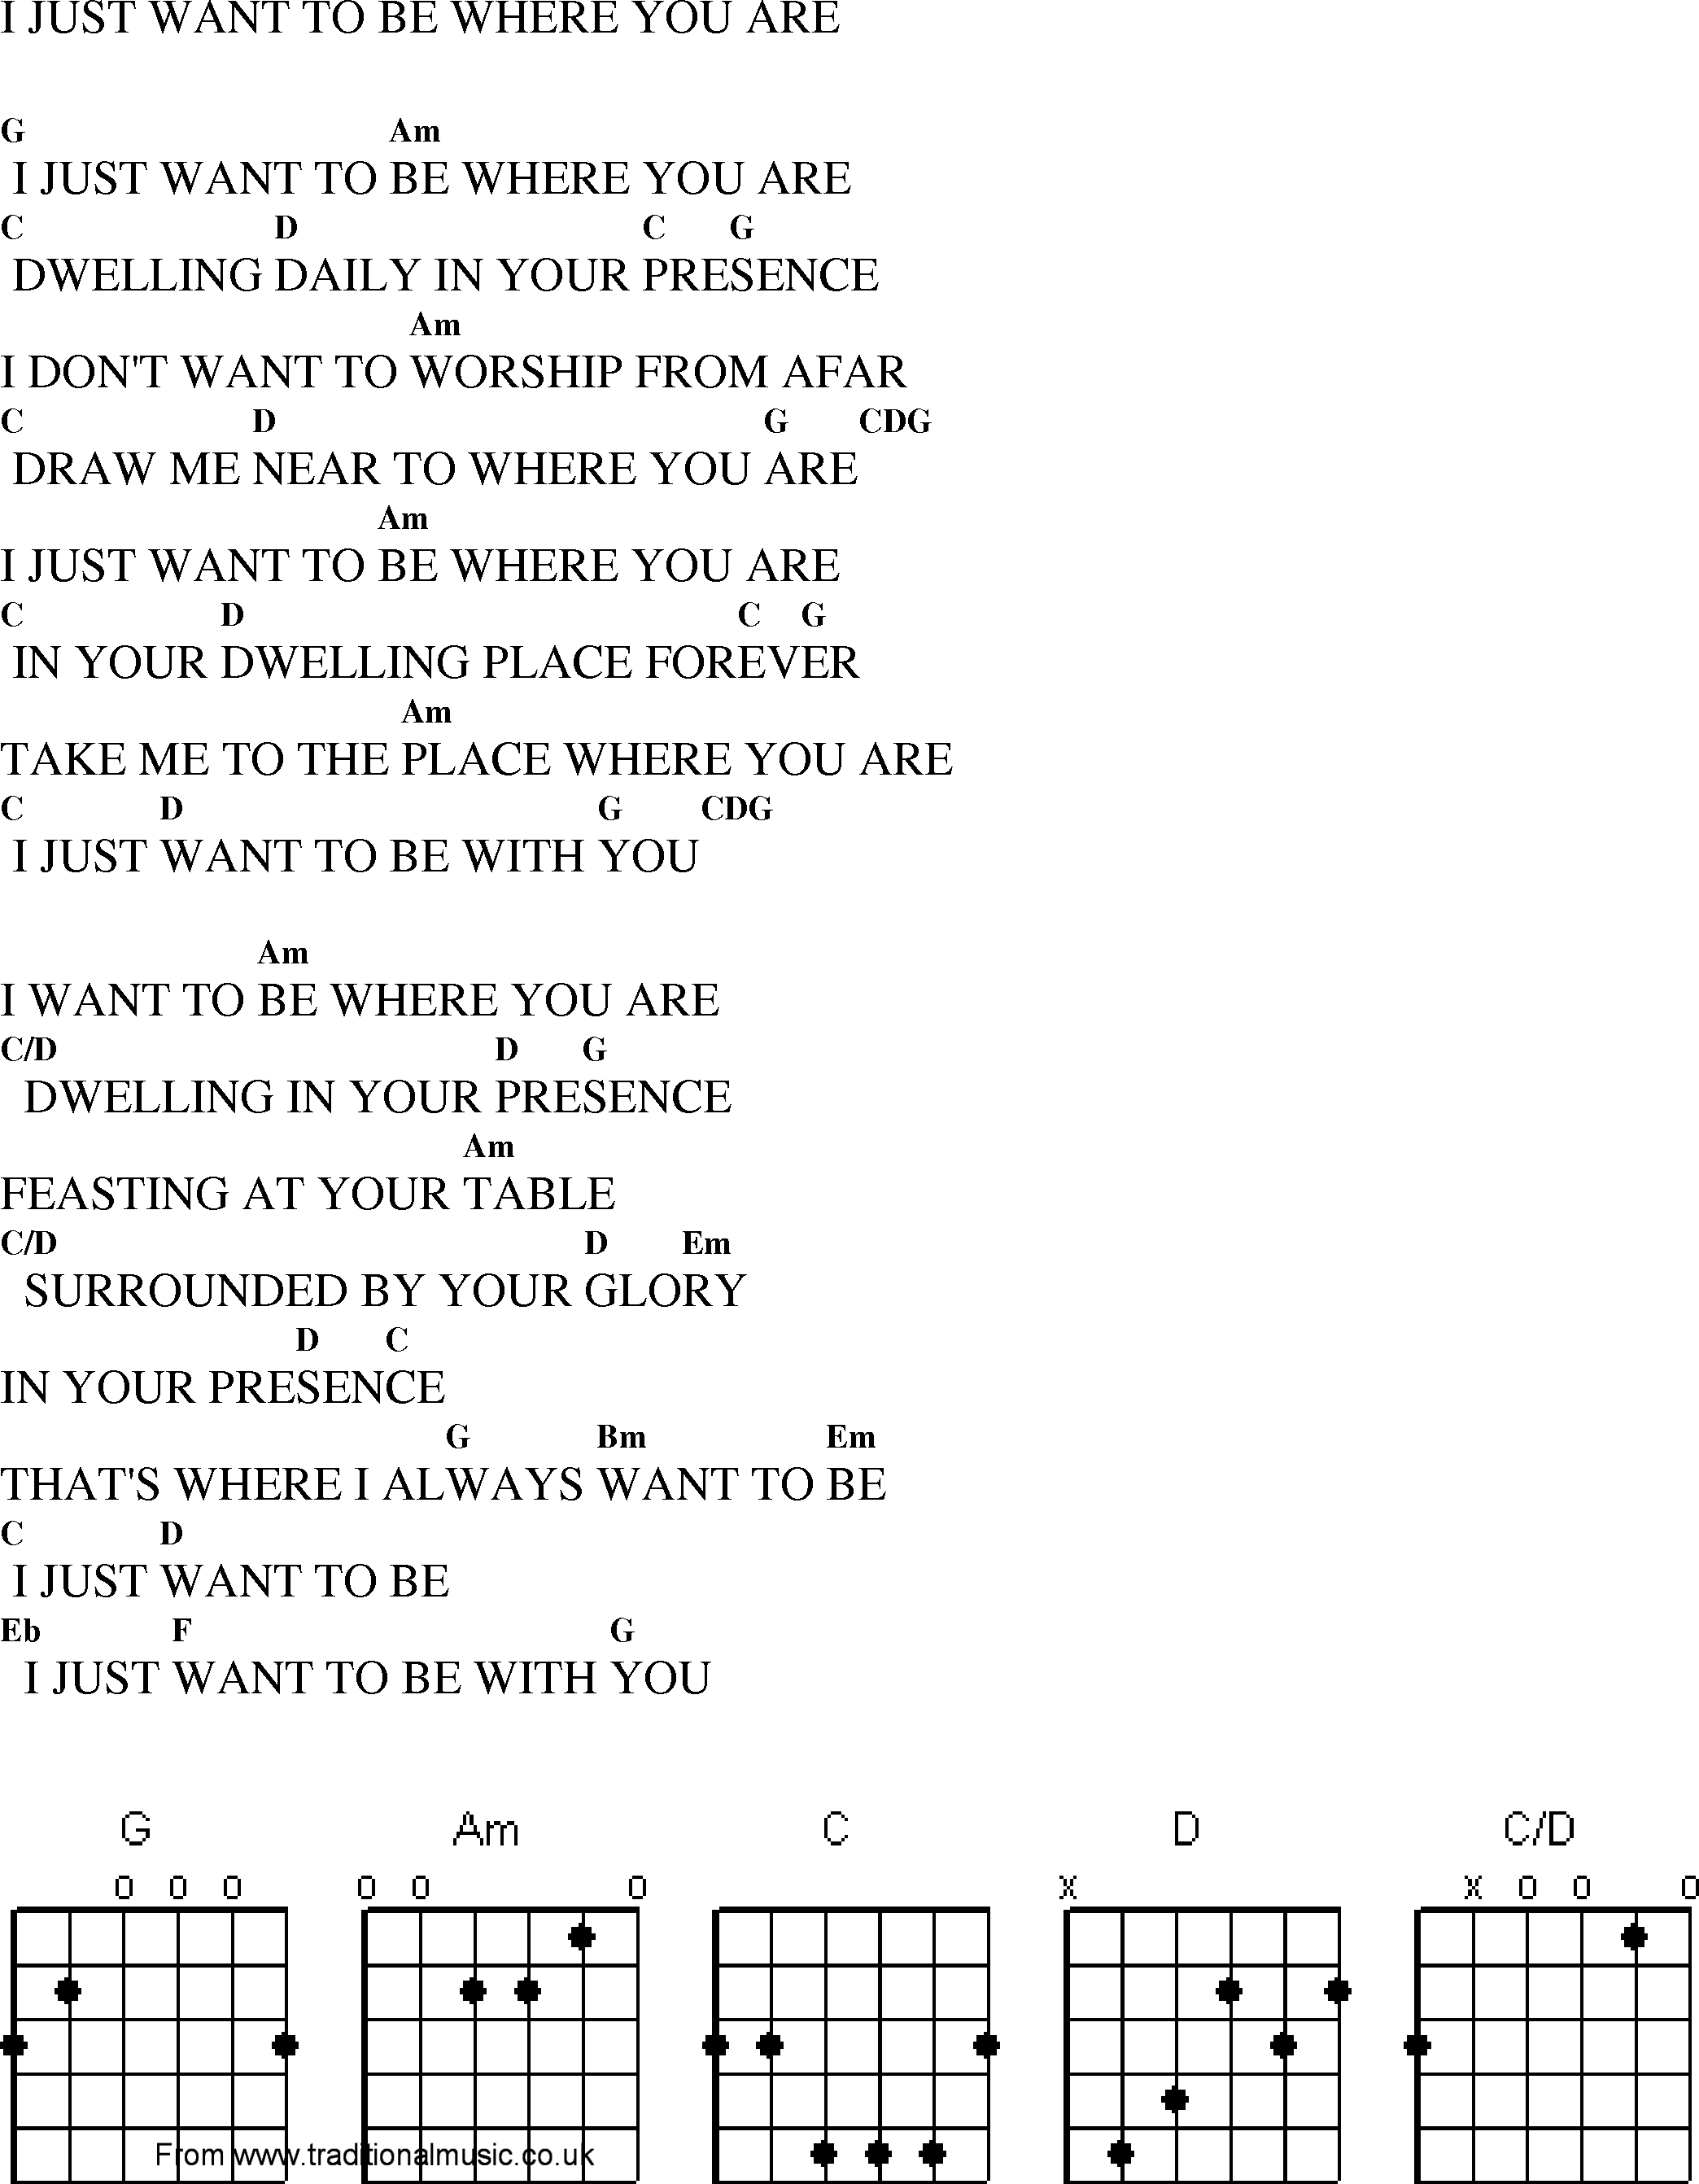 Gospel Song: i_just_want_to_be_where_you_are, lyrics and chords.